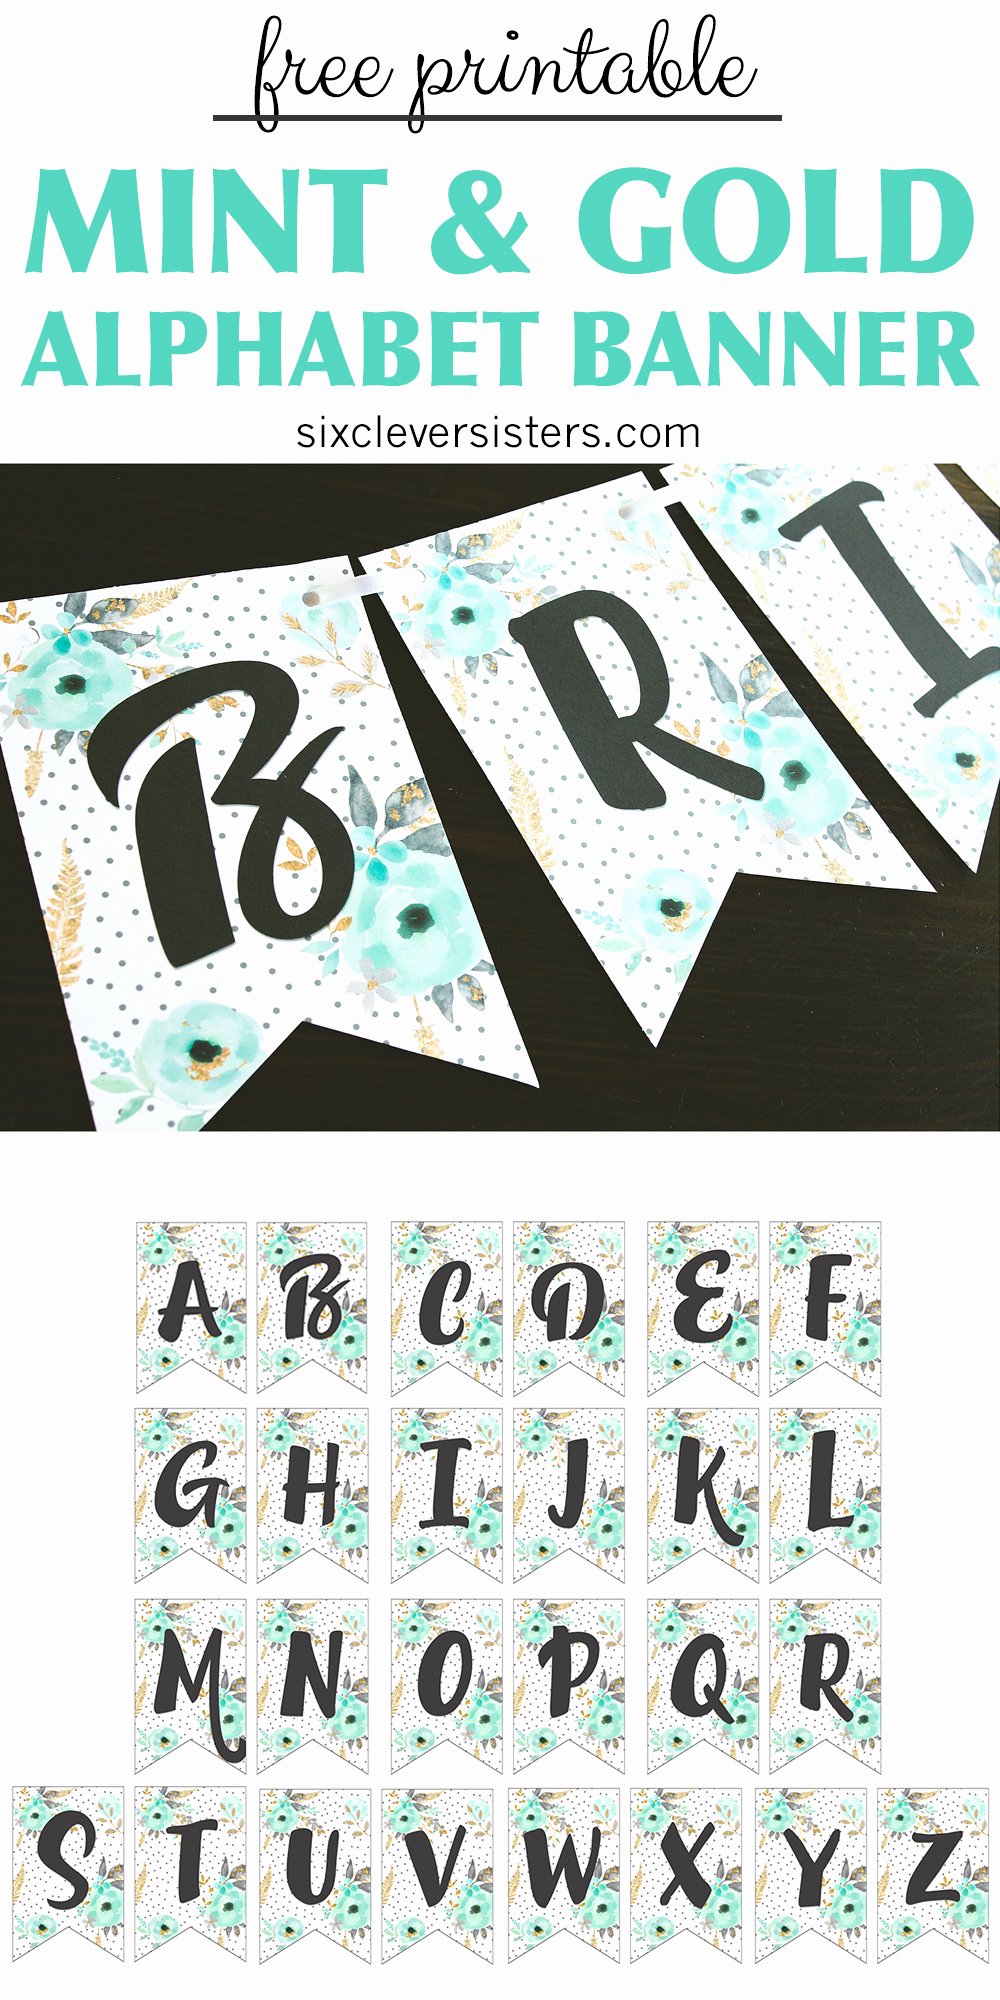 Free Printable Banner Letters Fresh Free Printable Alphabet Banner Mint&amp; Gold Six Clever